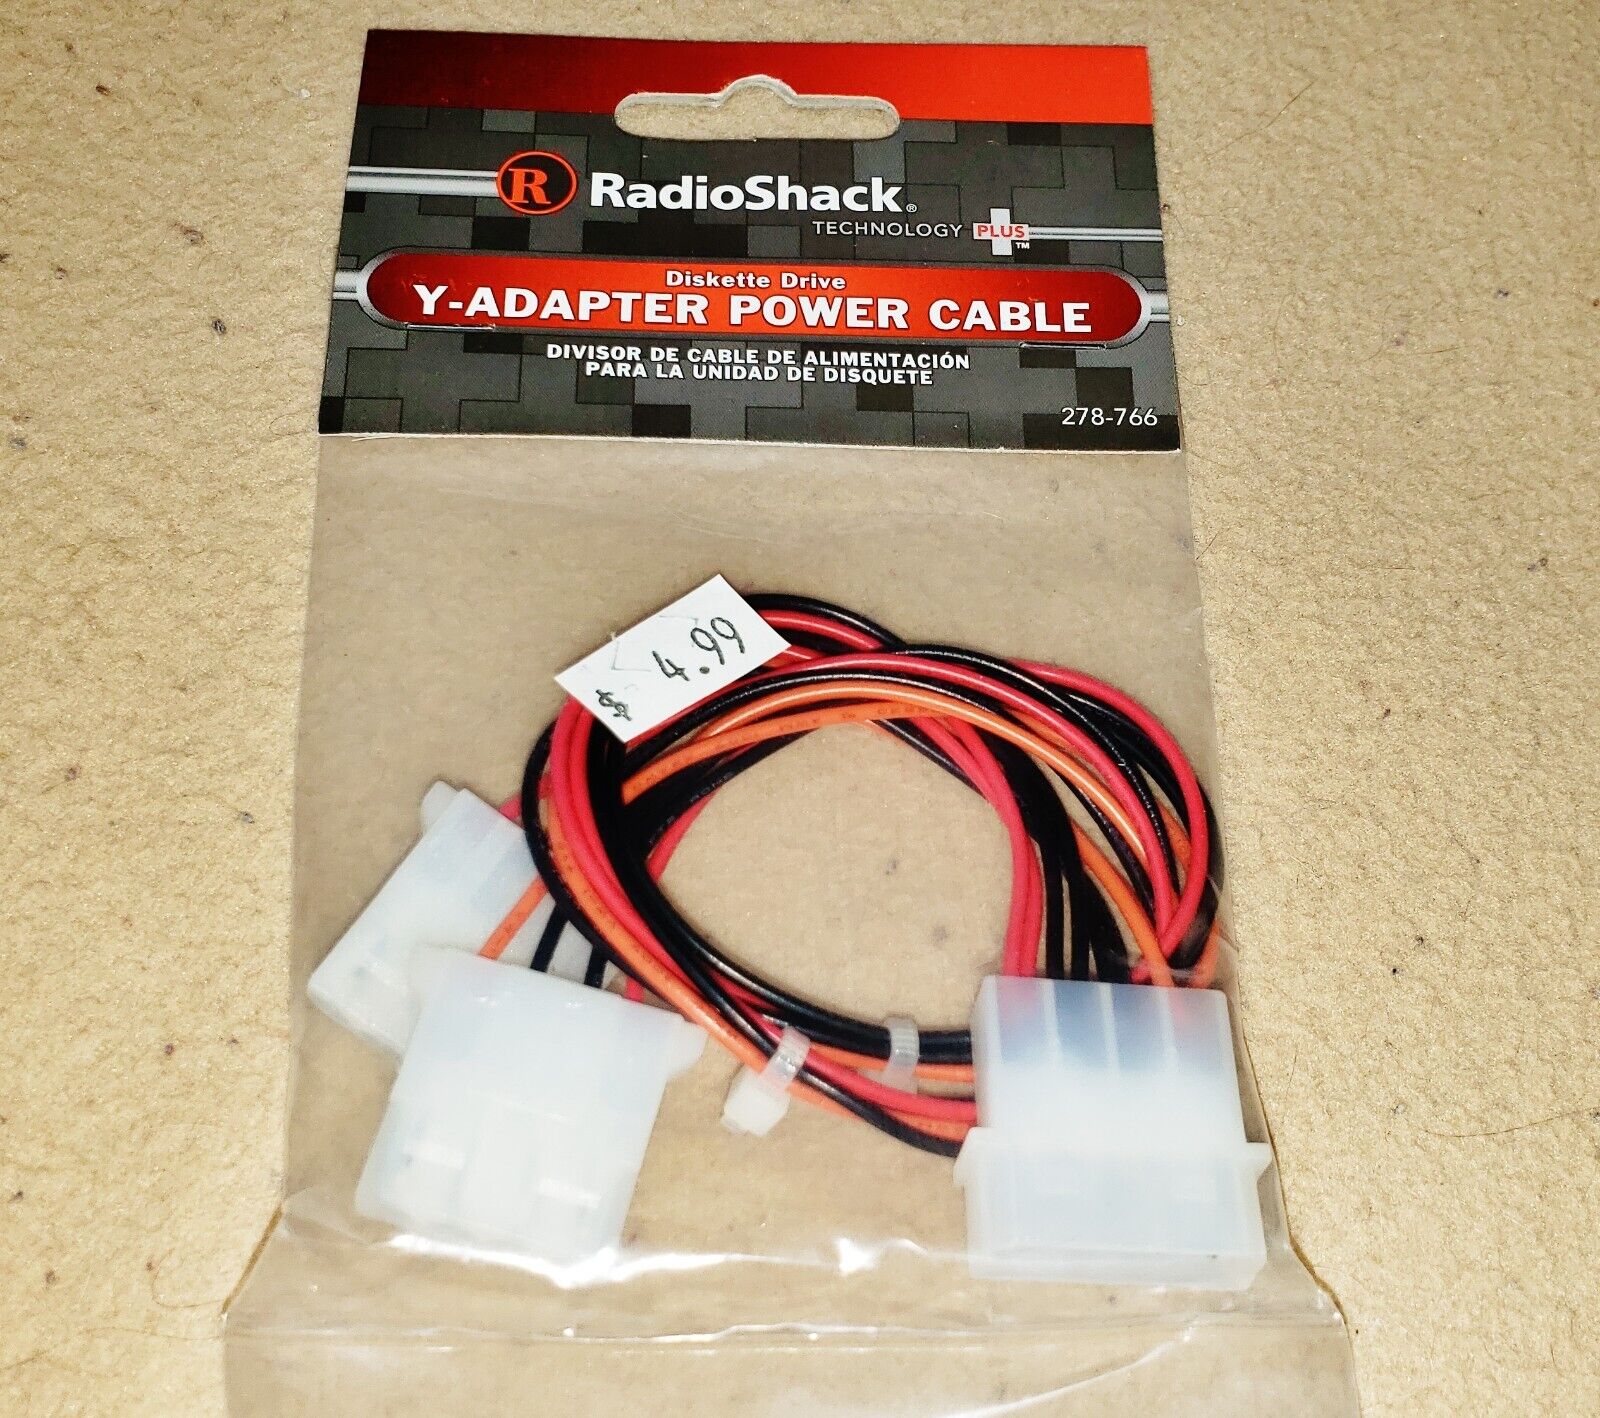 New NOS Radio Shack Diskette Drive Y-Adapter Power Cable in Package